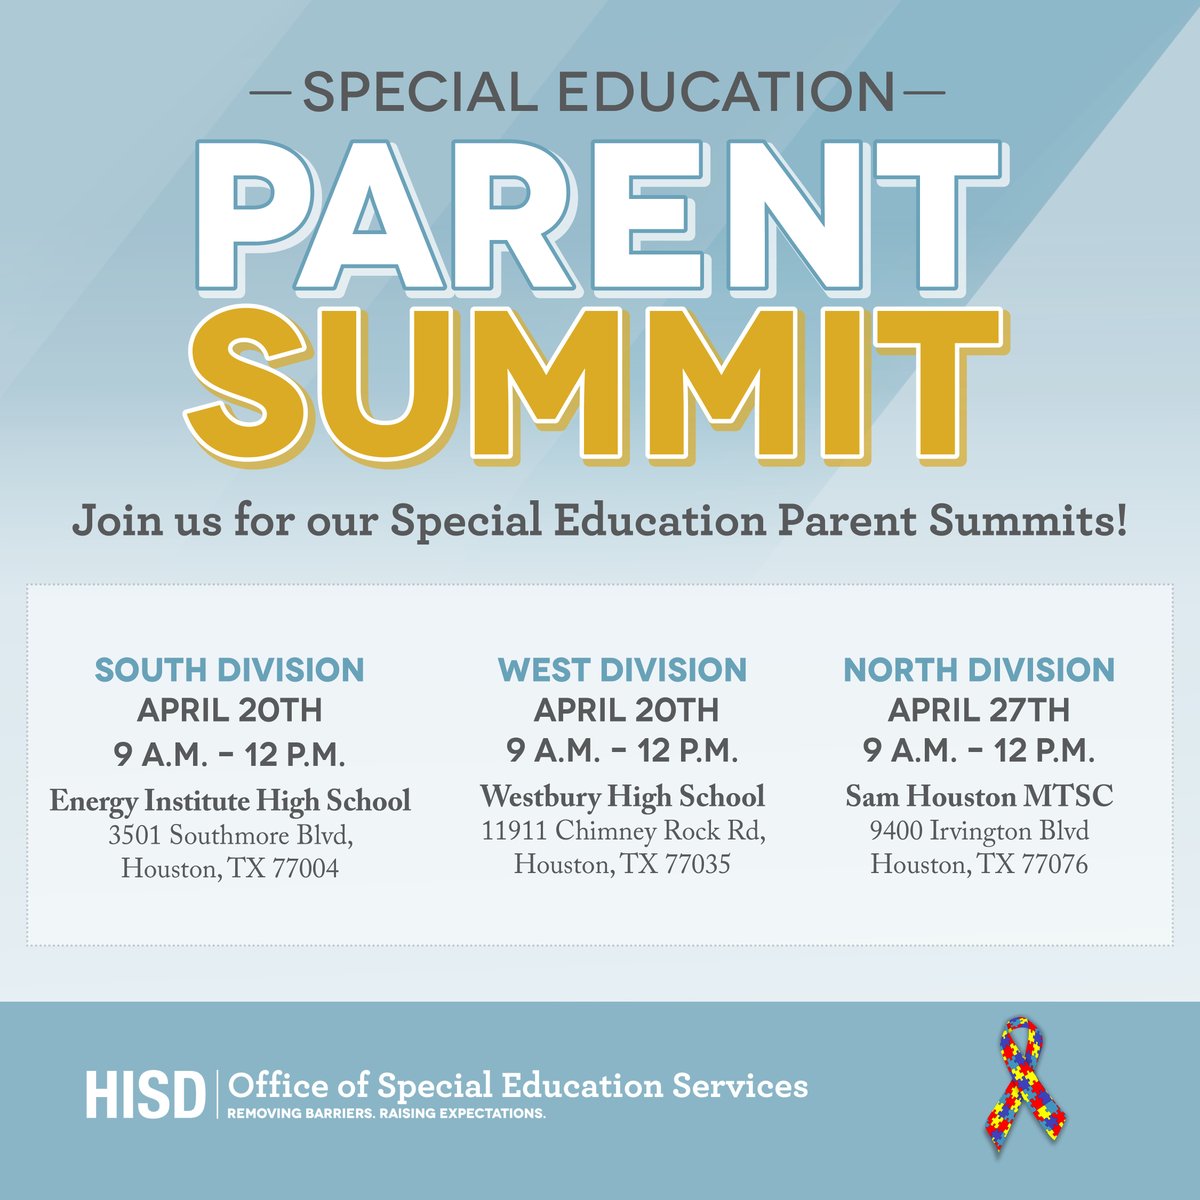 .@HisdSouth & @HISD_West will be hosting their Special Education Spring Parent Summit this Sat., April 20. There, HISD parents & caregivers can connect with special education school staff, receive important information, & access resources through our vendor fairs. See you there!